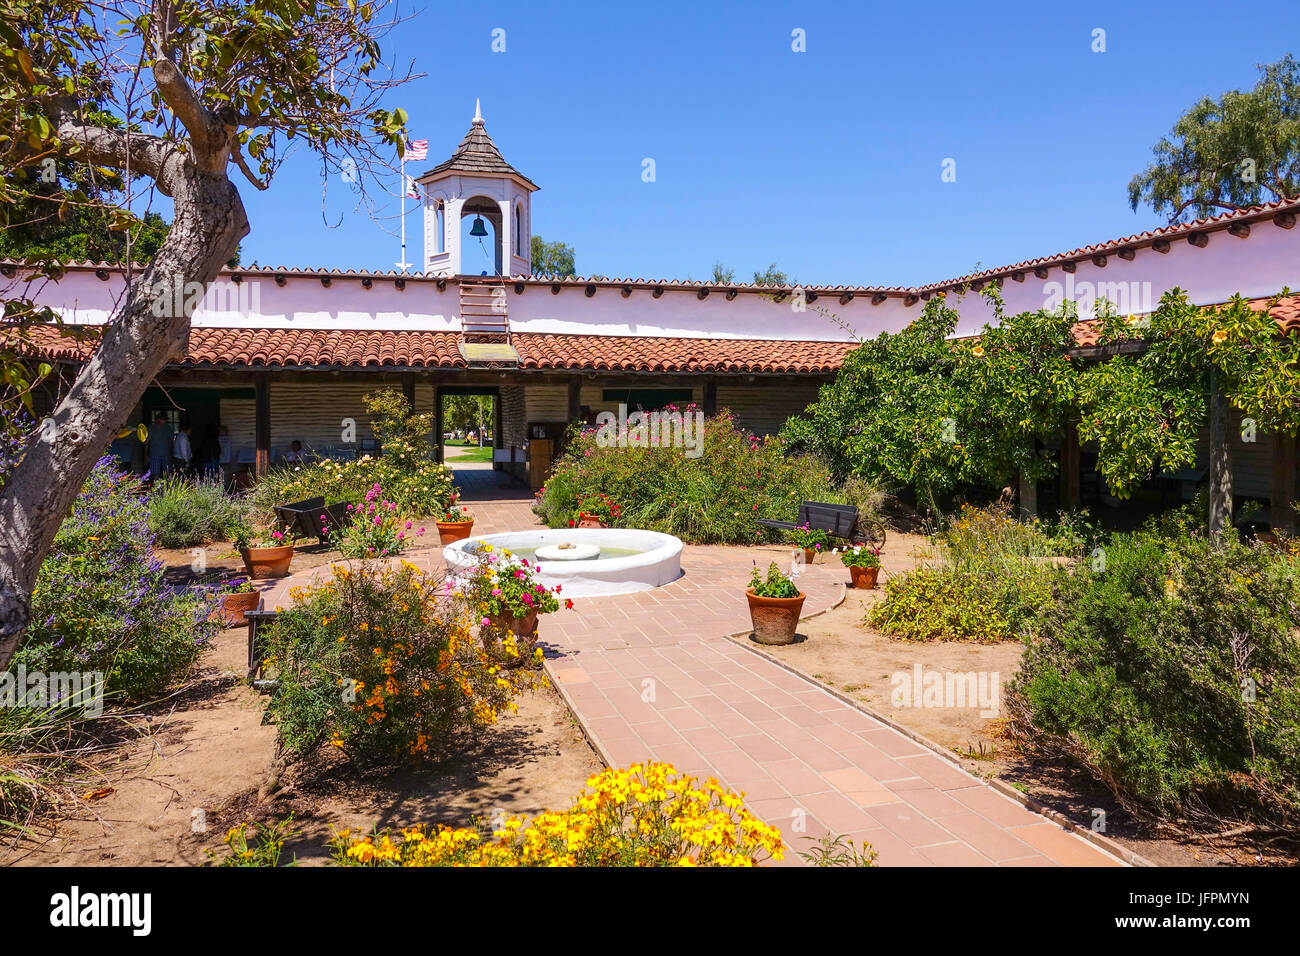 Mexican style house and garden Stock Photo